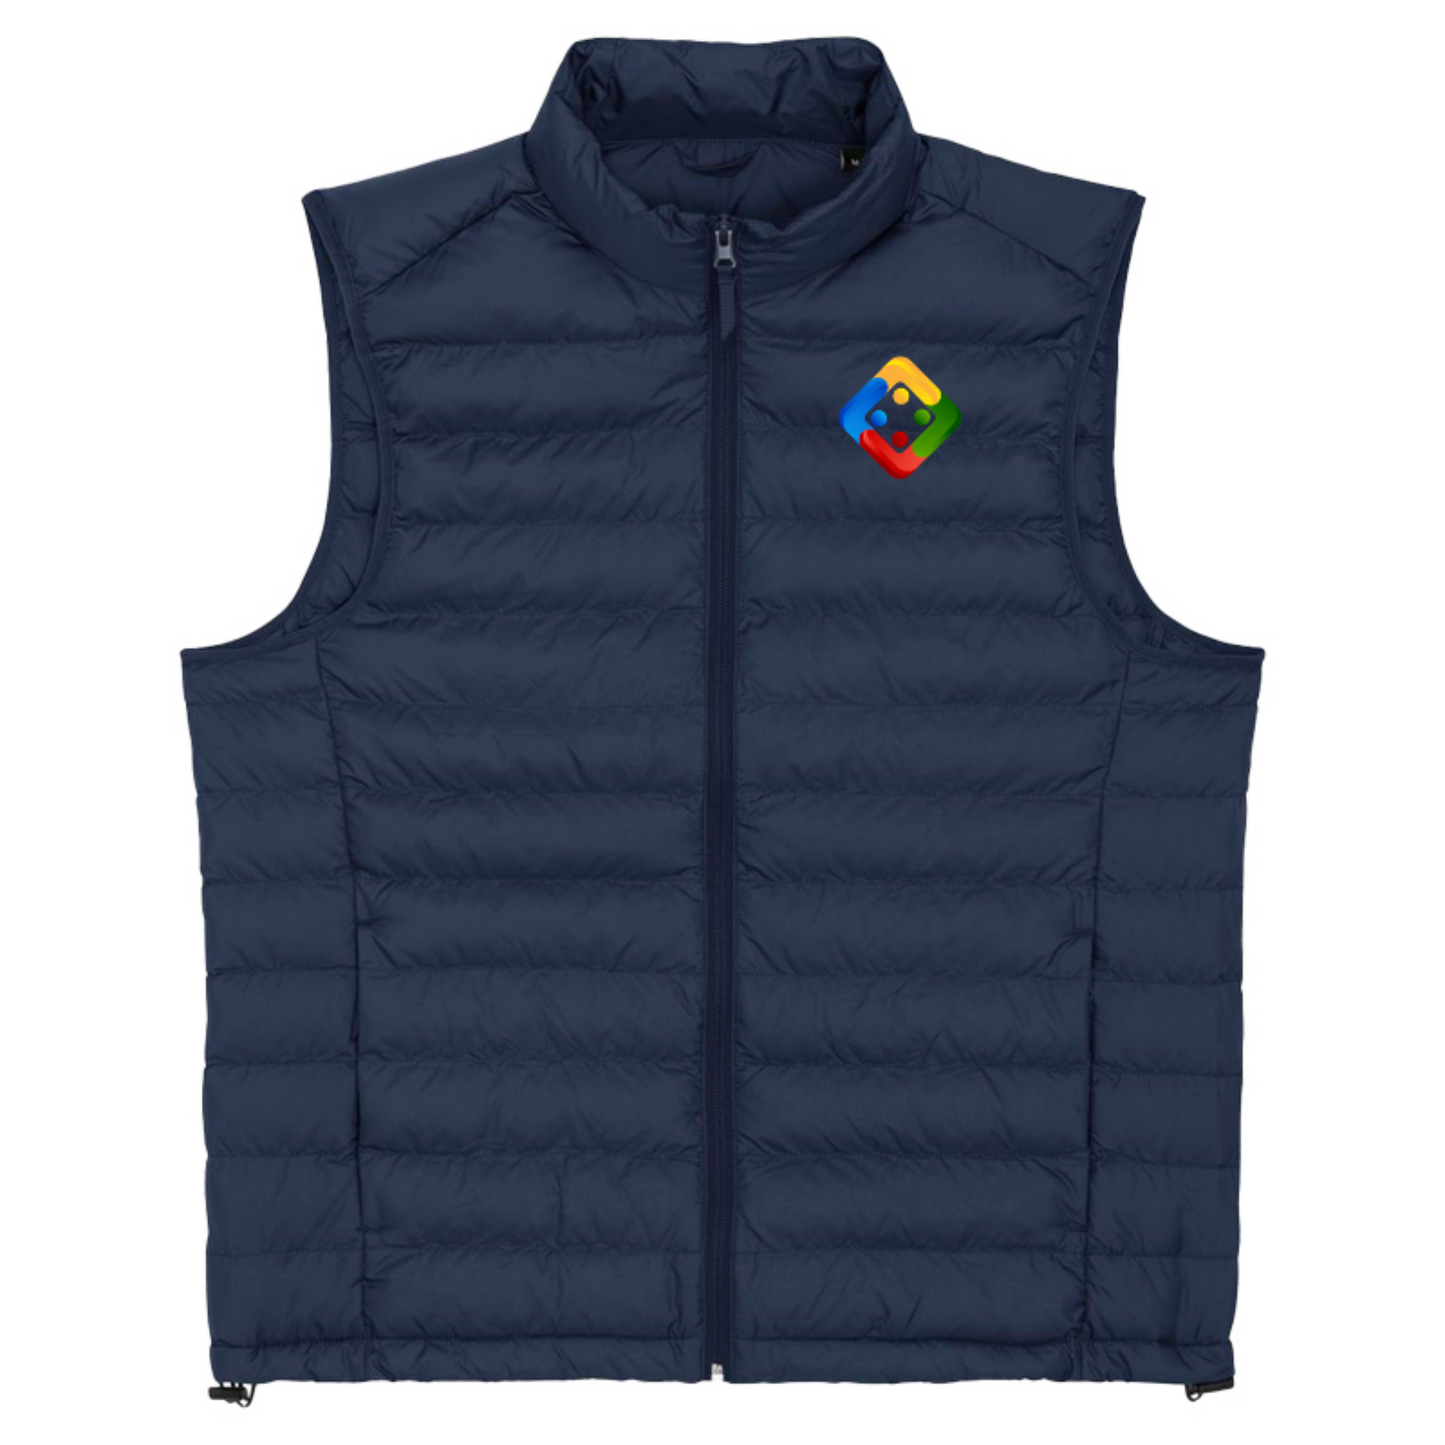 Unisex gilet with embroidered Uckers emblem. Available in 8 colours.